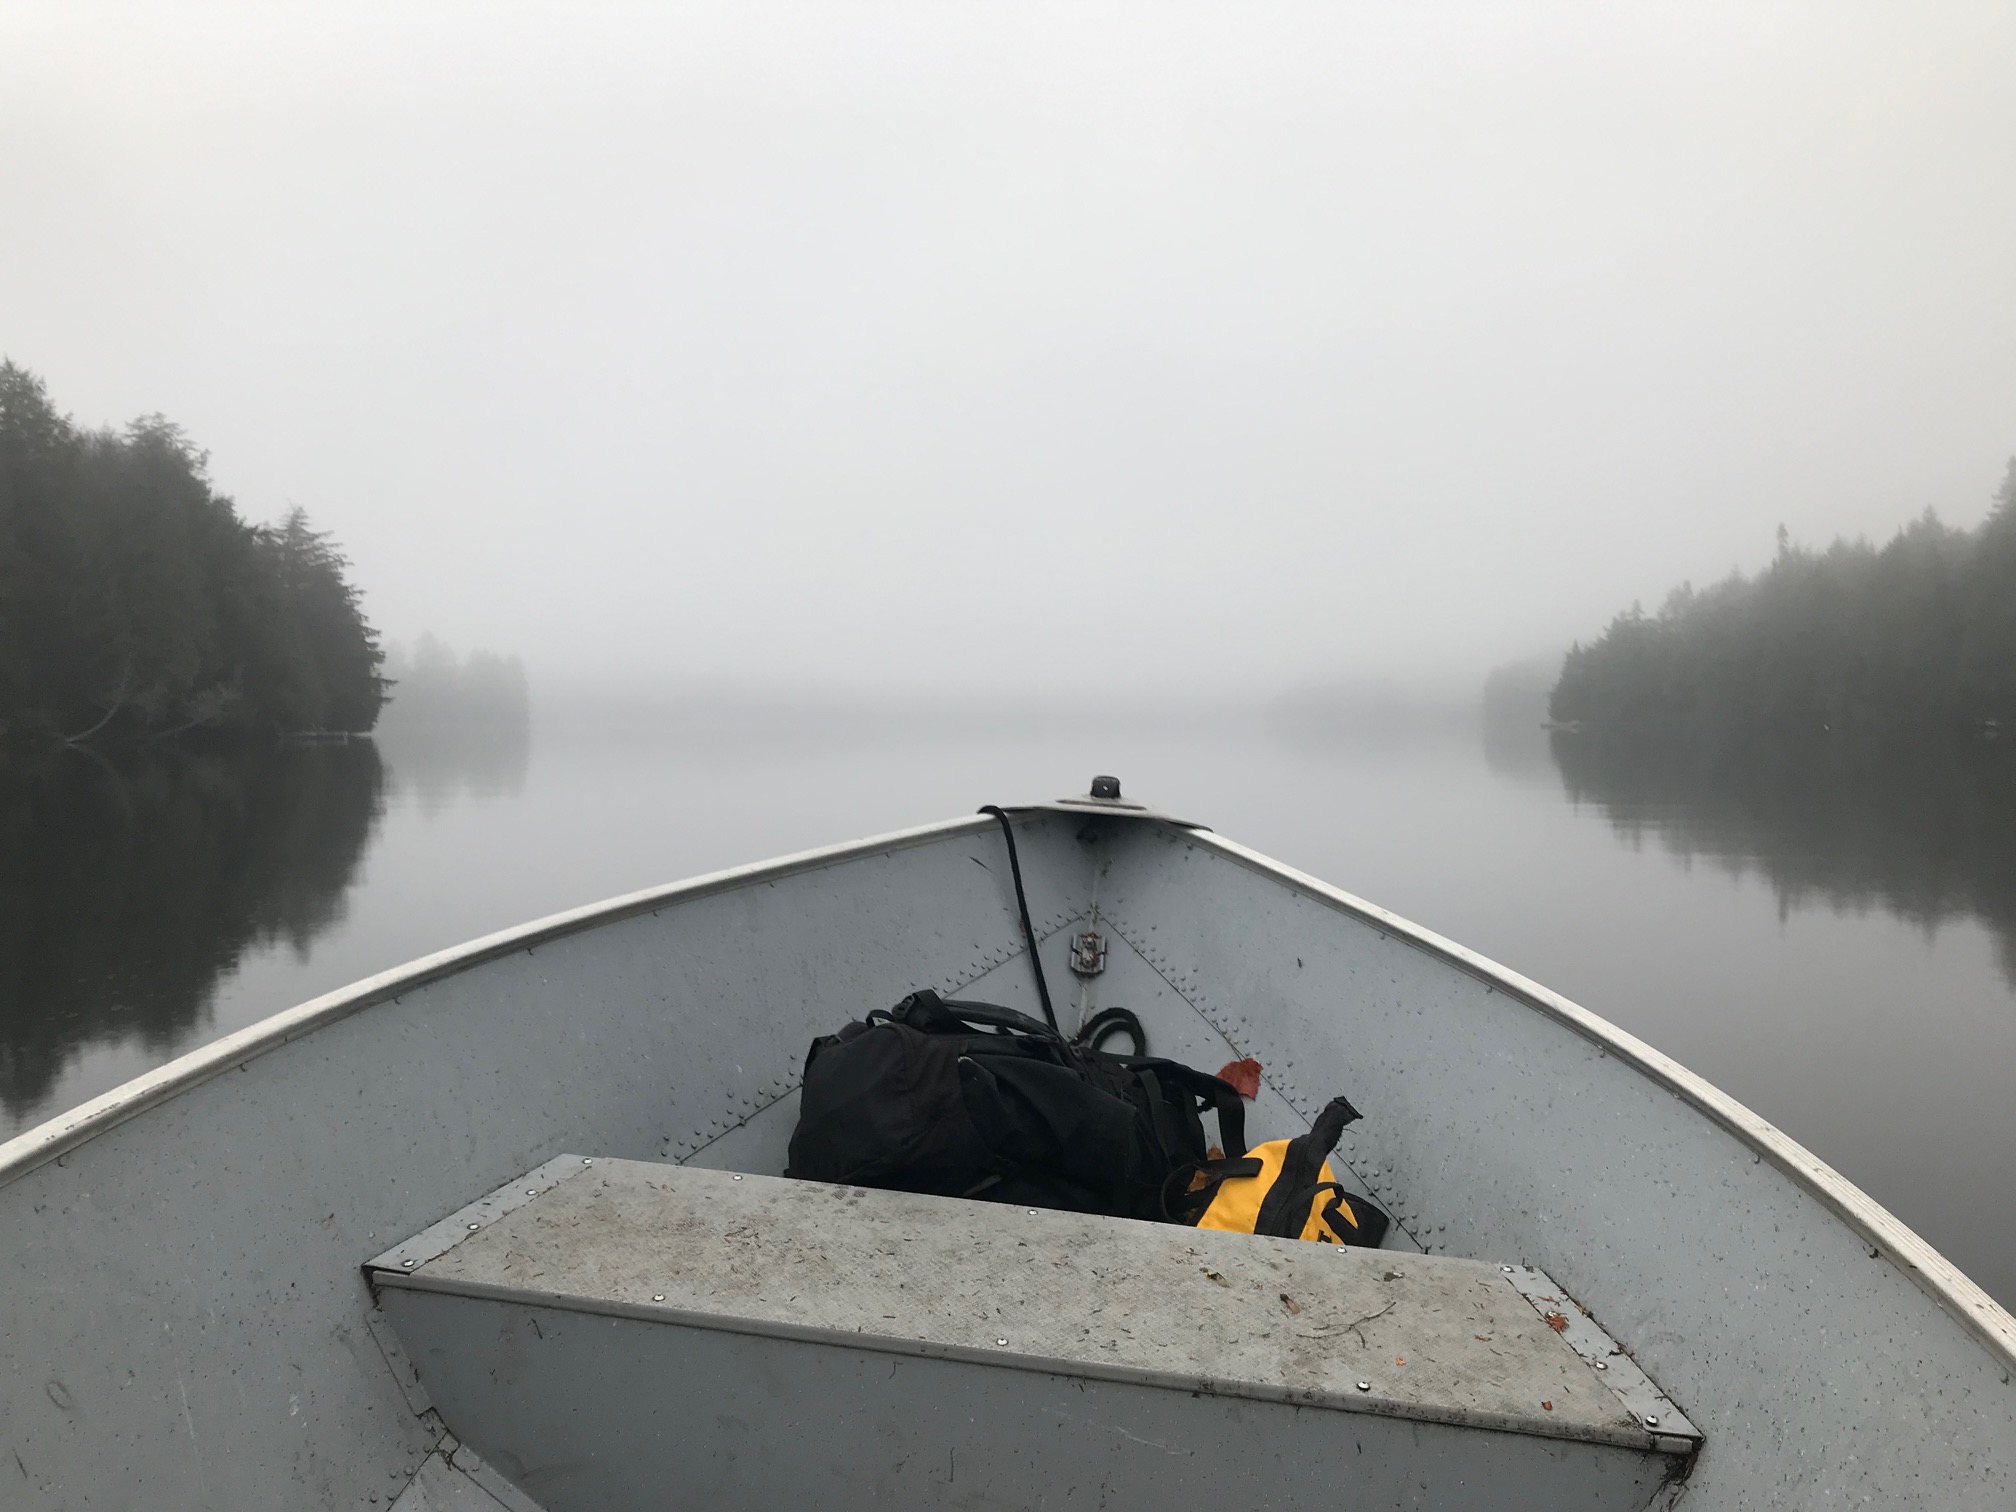 View of a still lake on a foggy day, from inside a small boat.